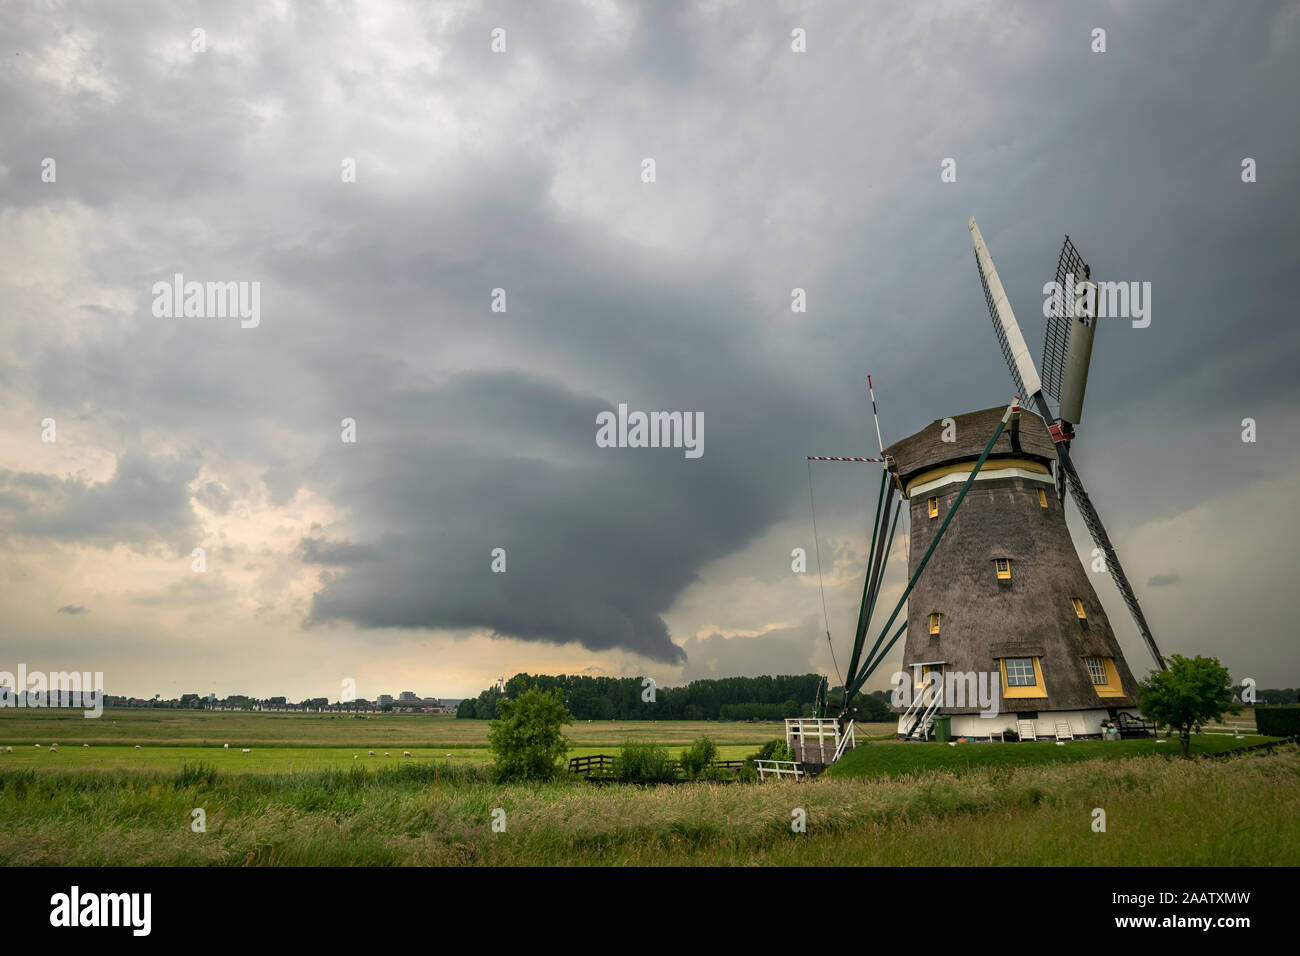 Wallcloud of a supercell thunderstorm near a windmill in The Netherlands Stock Photo